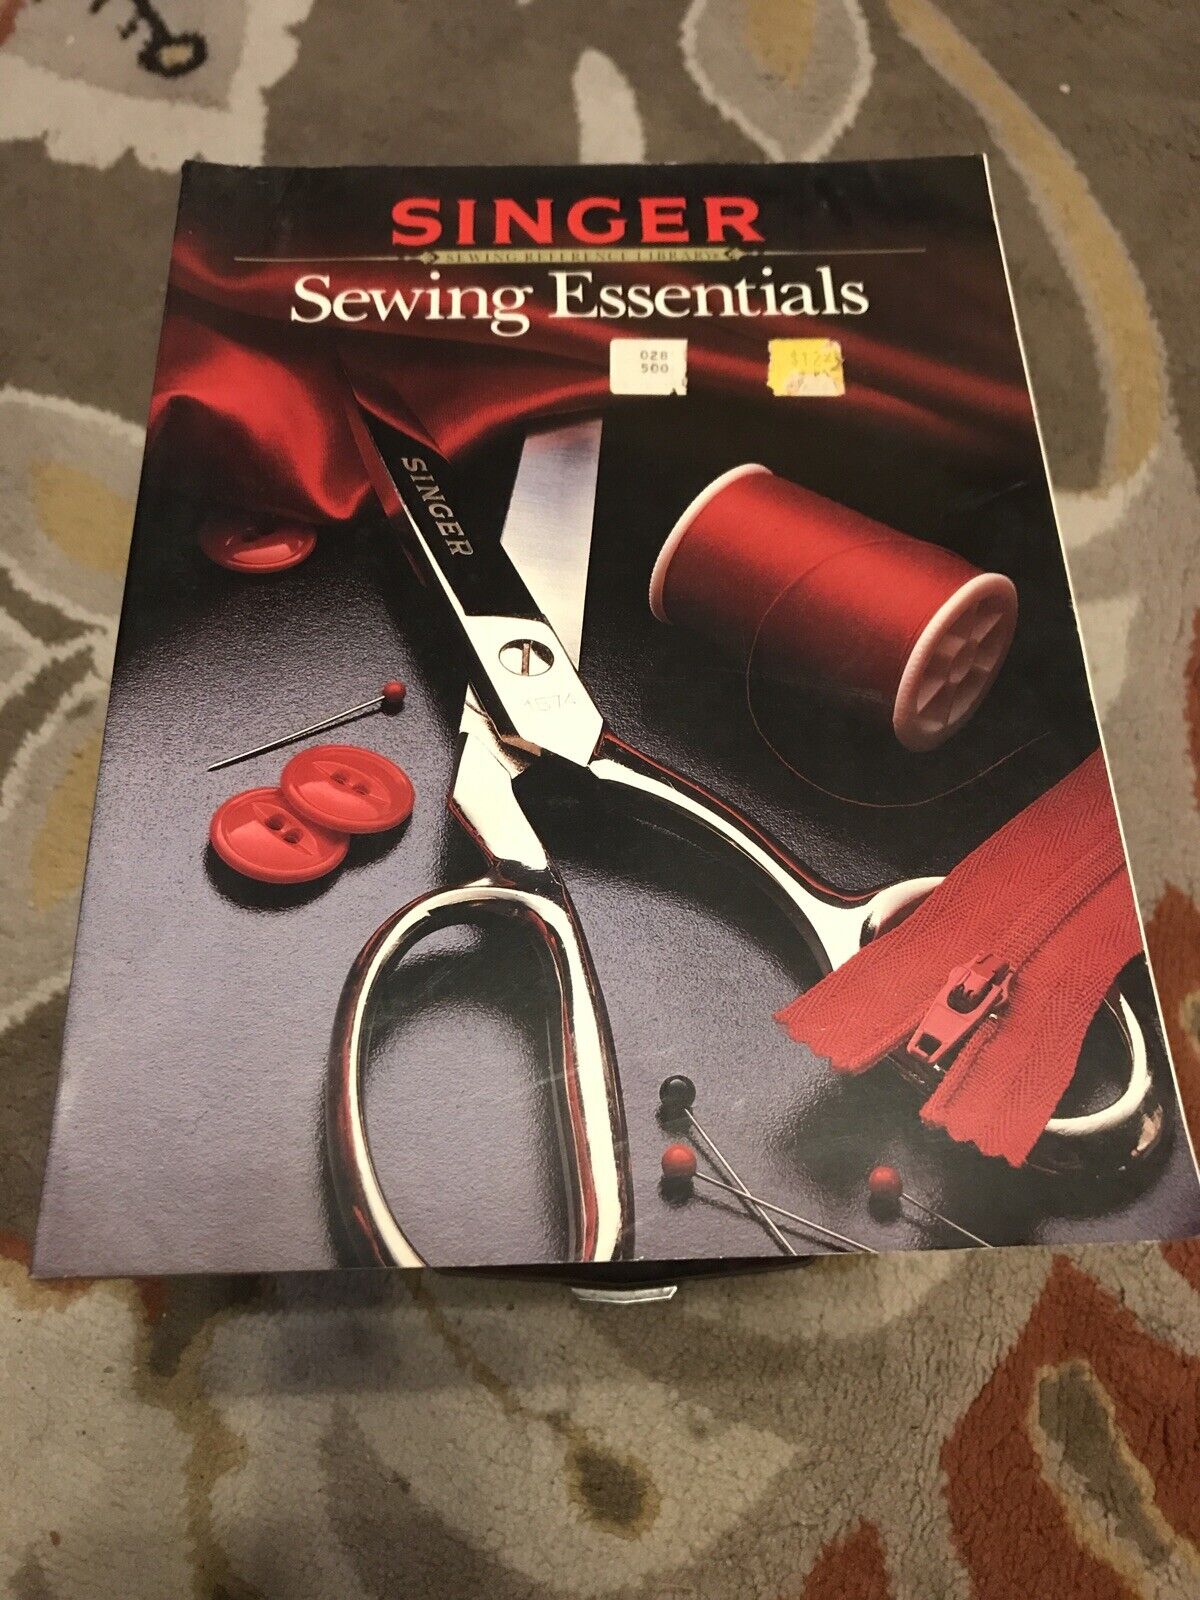 Vintage Book “singer Sewing Essentials” 1984 Soft Cover Sewing Reference Library